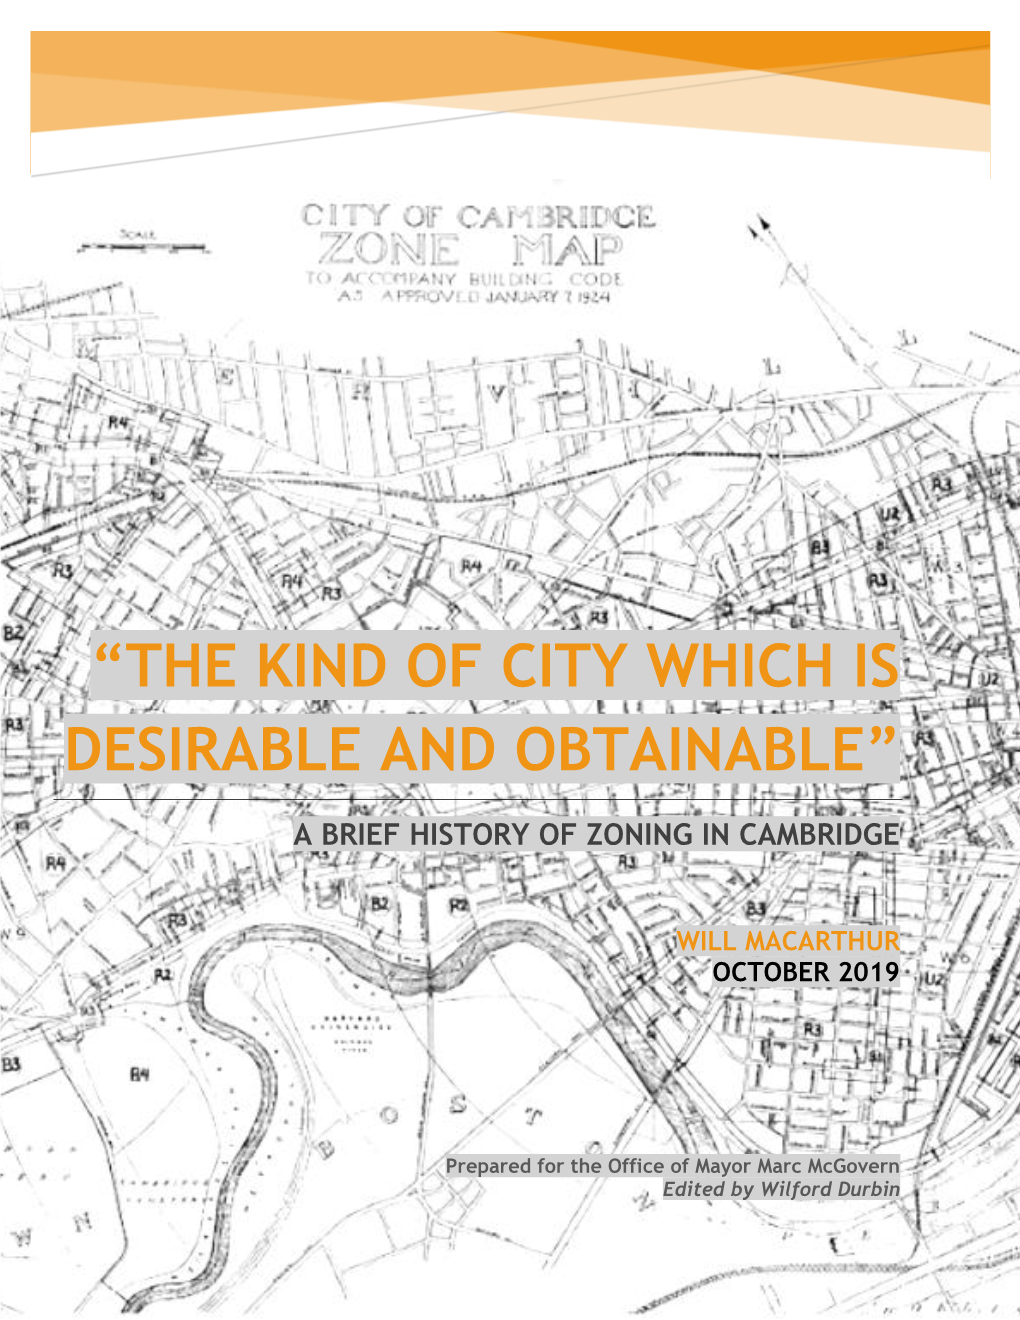 “The Kind of City Which Is Desirable and Obtainable”